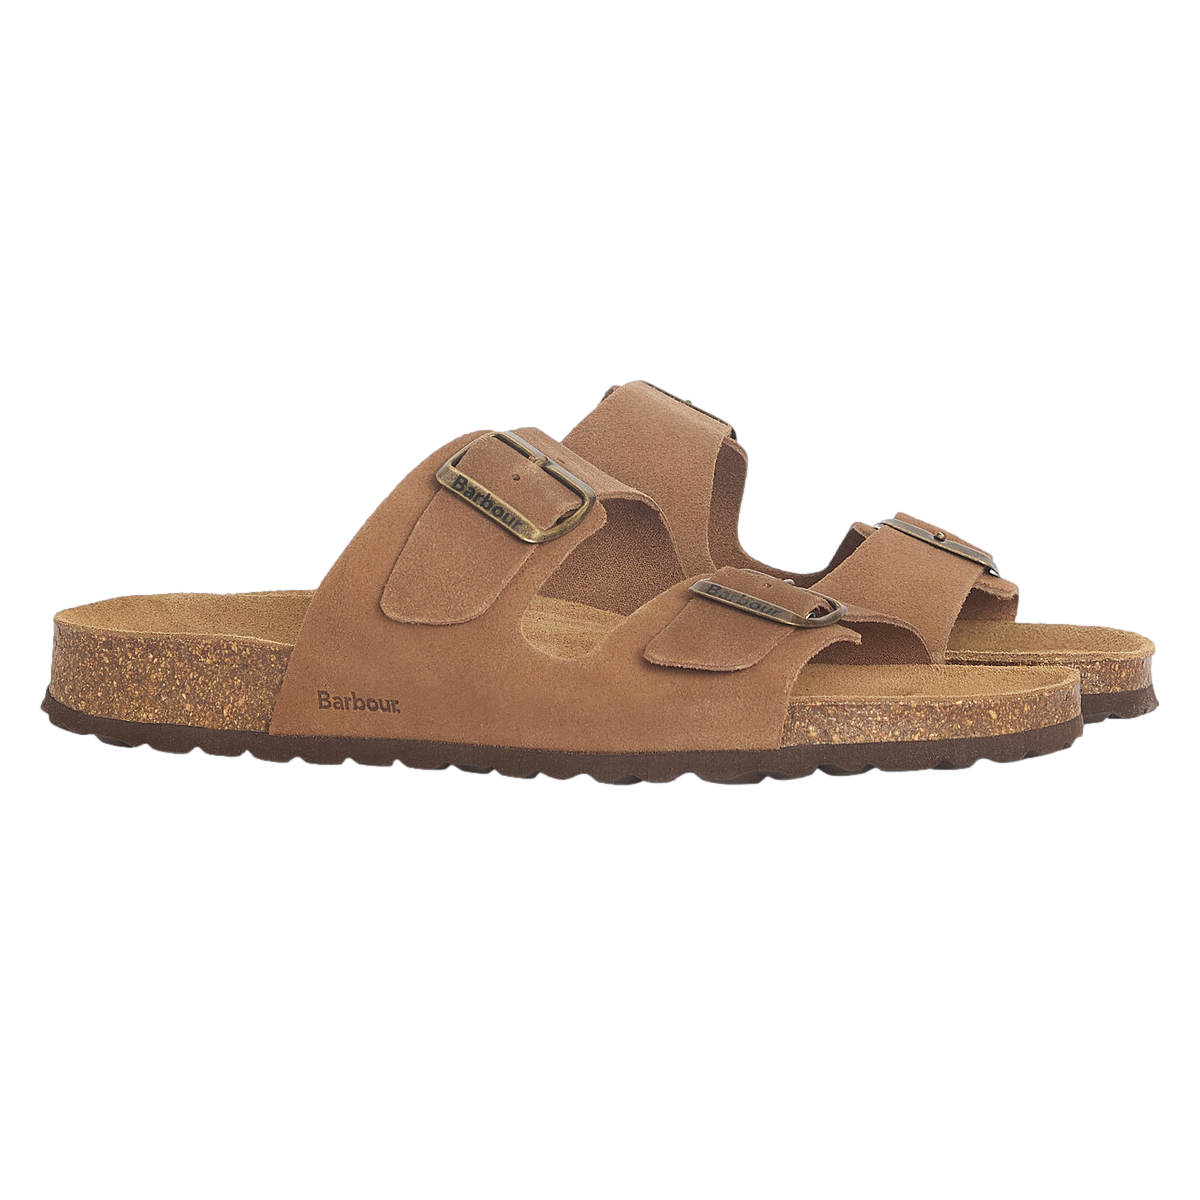 Barbour Sennen Sandal BE33 Taupe